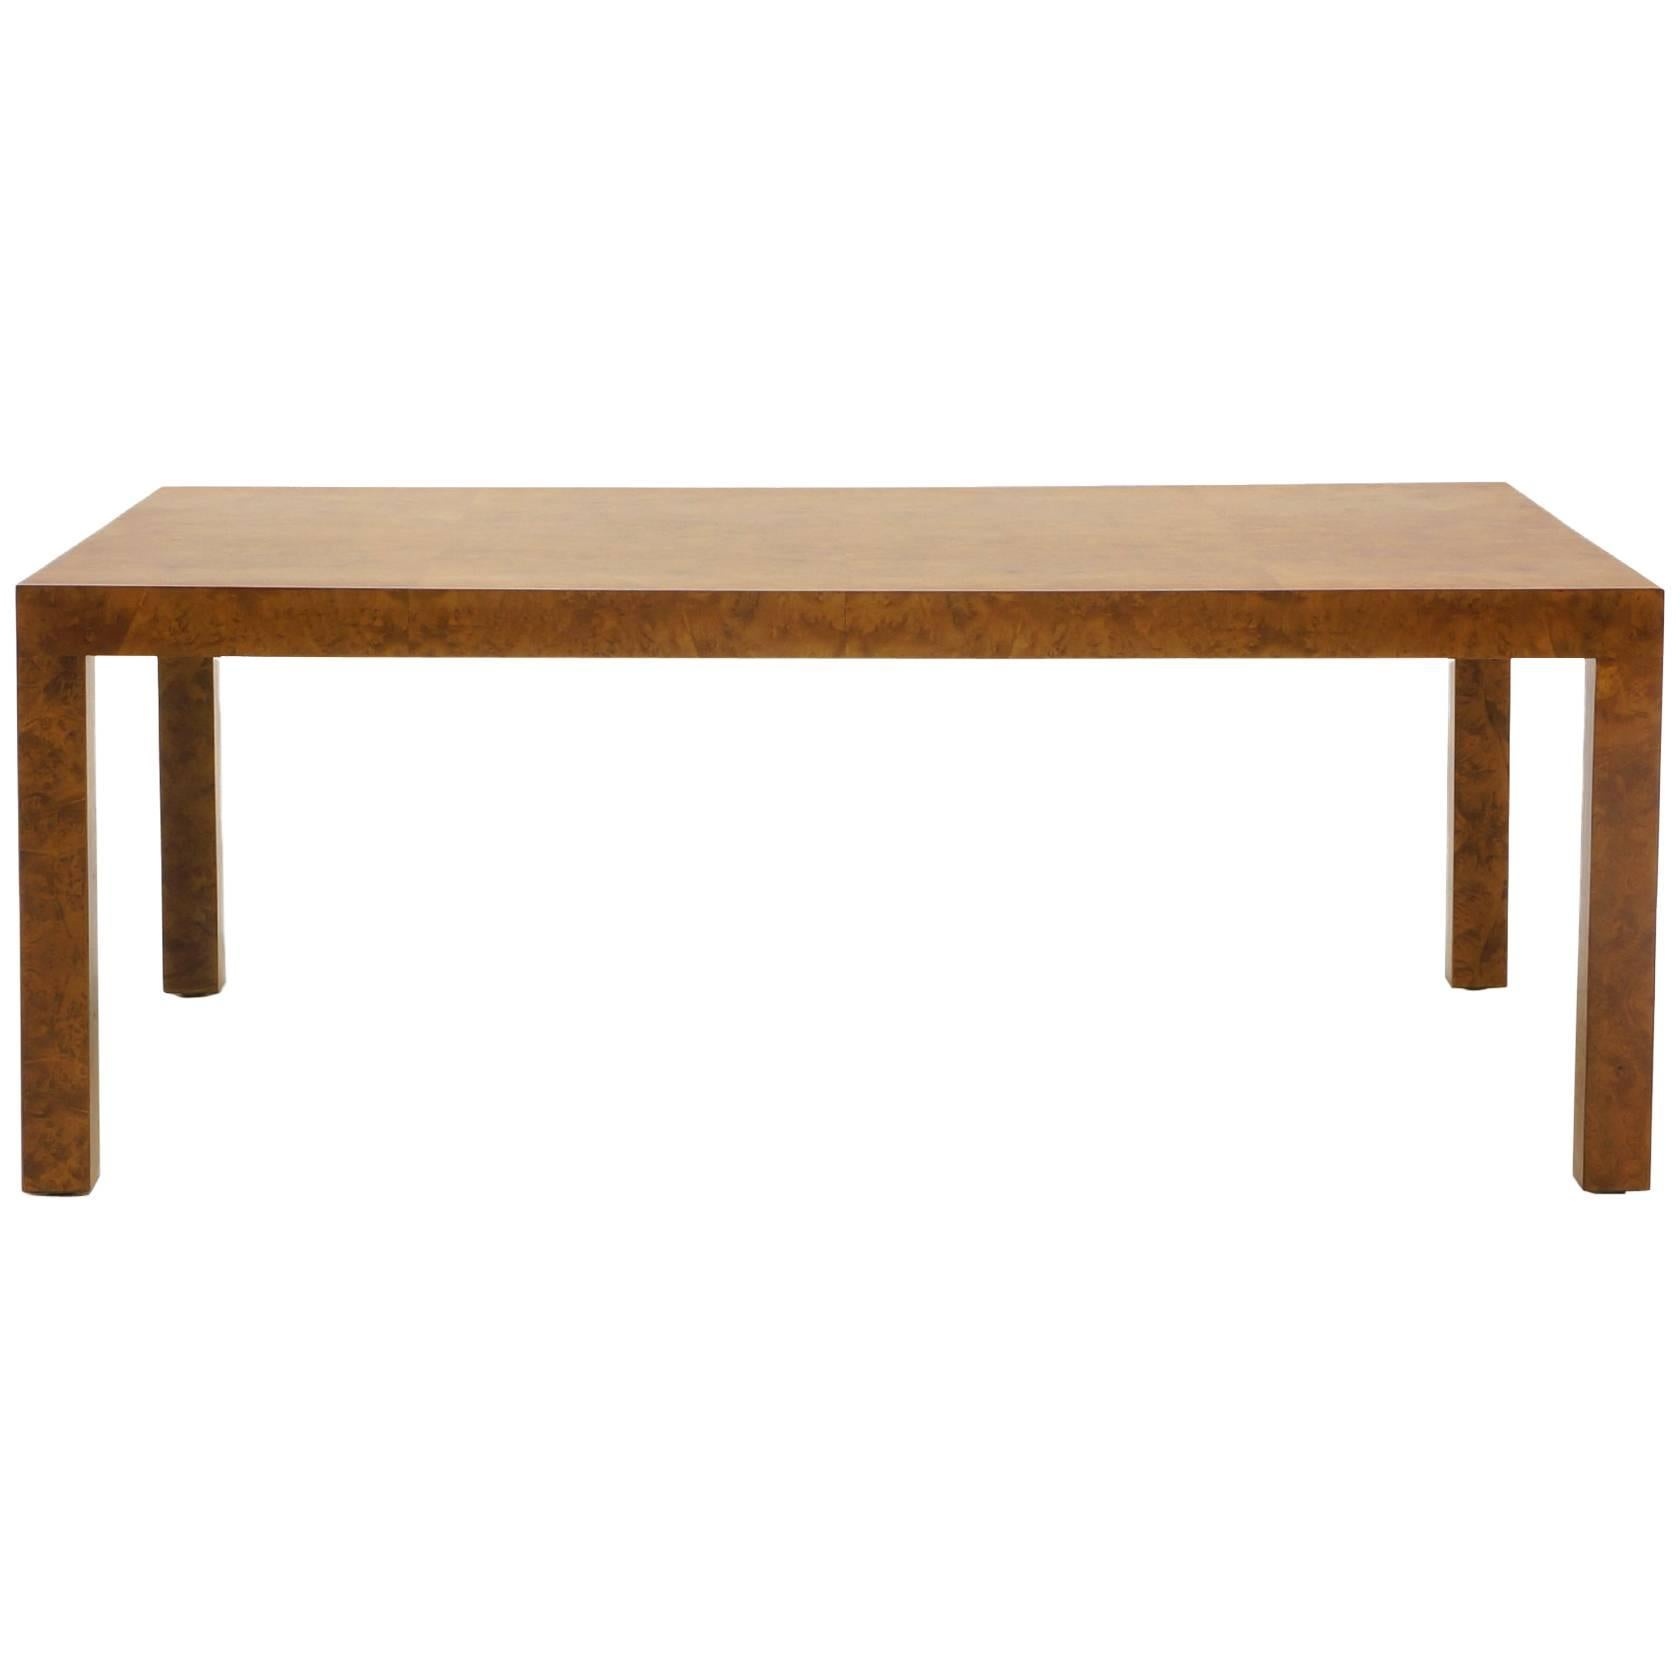 Milo Baughman Coffee Table for Directional, Burl Olive Wood, Excellent